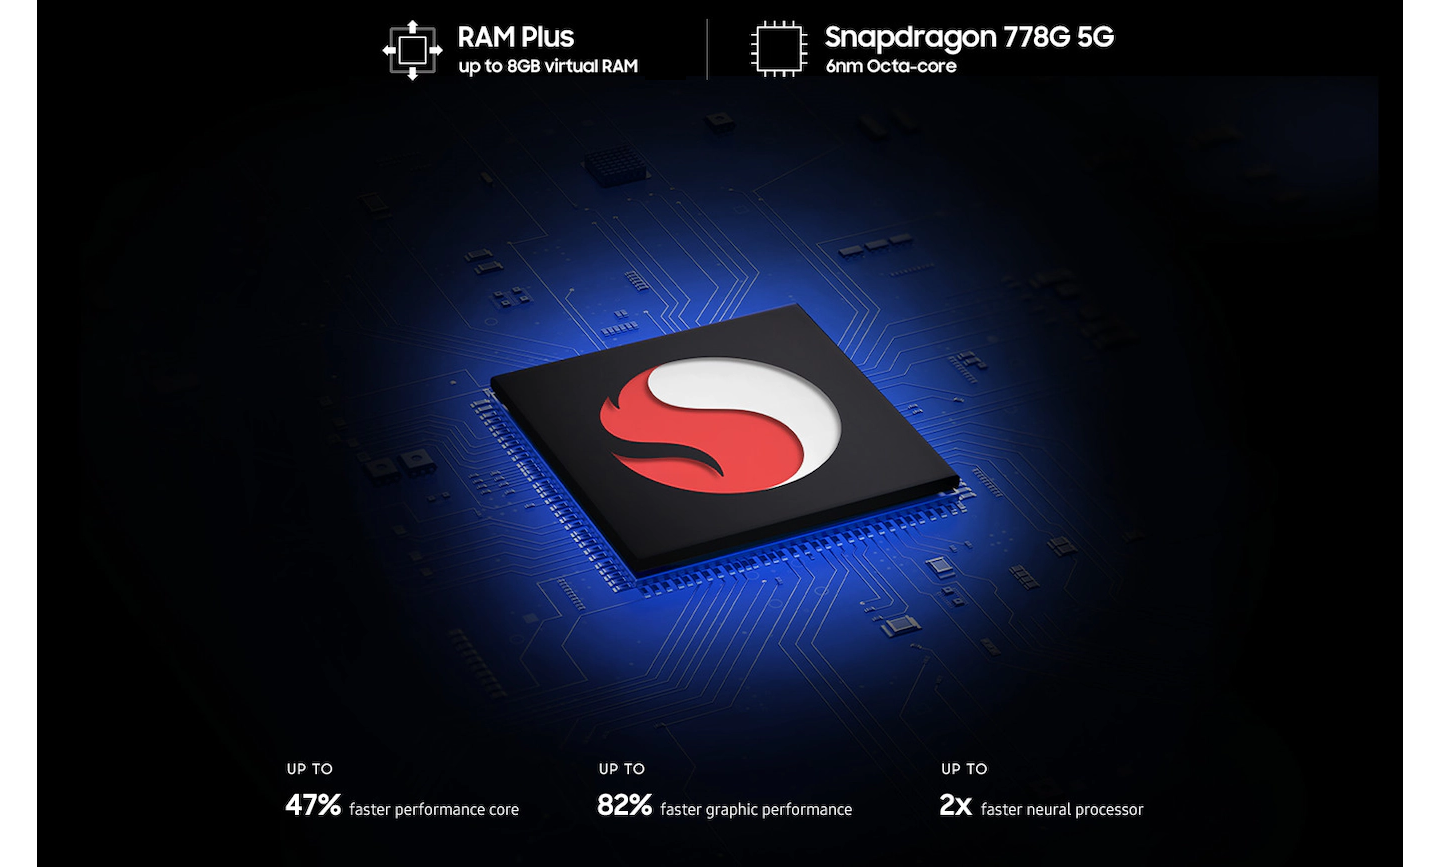 A black processing chip shows a large Snapdragon logo at the center. Surrounding the chip are text that reads RAM Plus up to 6GB/8GB virtual RAM, Snapdragon 778G 5G 6nm Octa-core, Up to 47% faster performance core, Up to 82% faster graphic performance, Up to 2X faster neural processor.